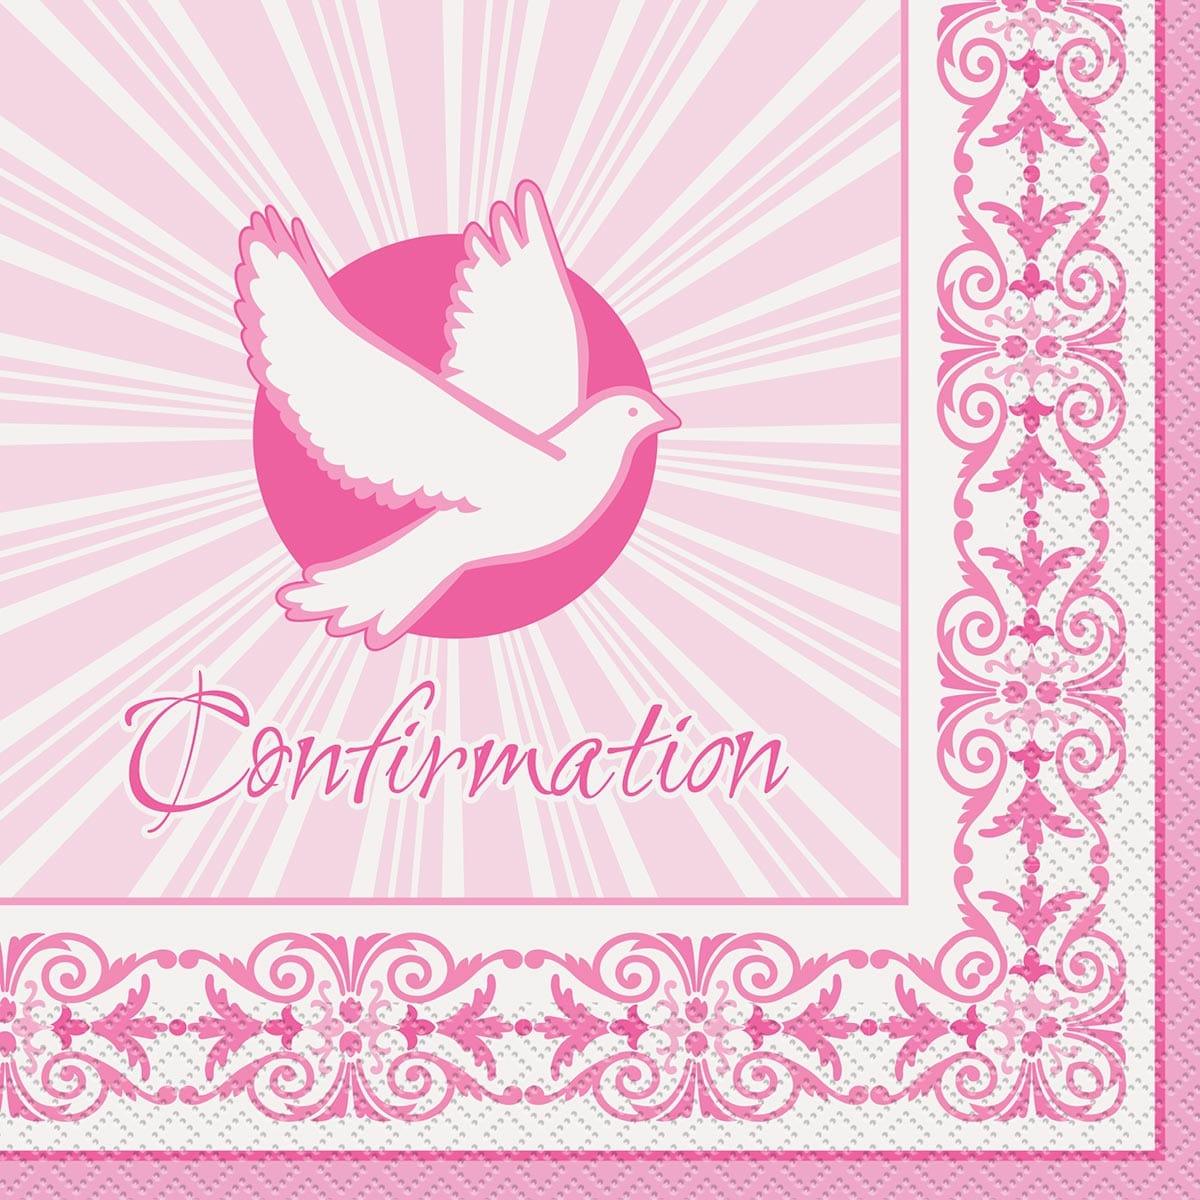 Buy Religious Lunch Napkins Confirmation - Pink 16/pkg. sold at Party Expert